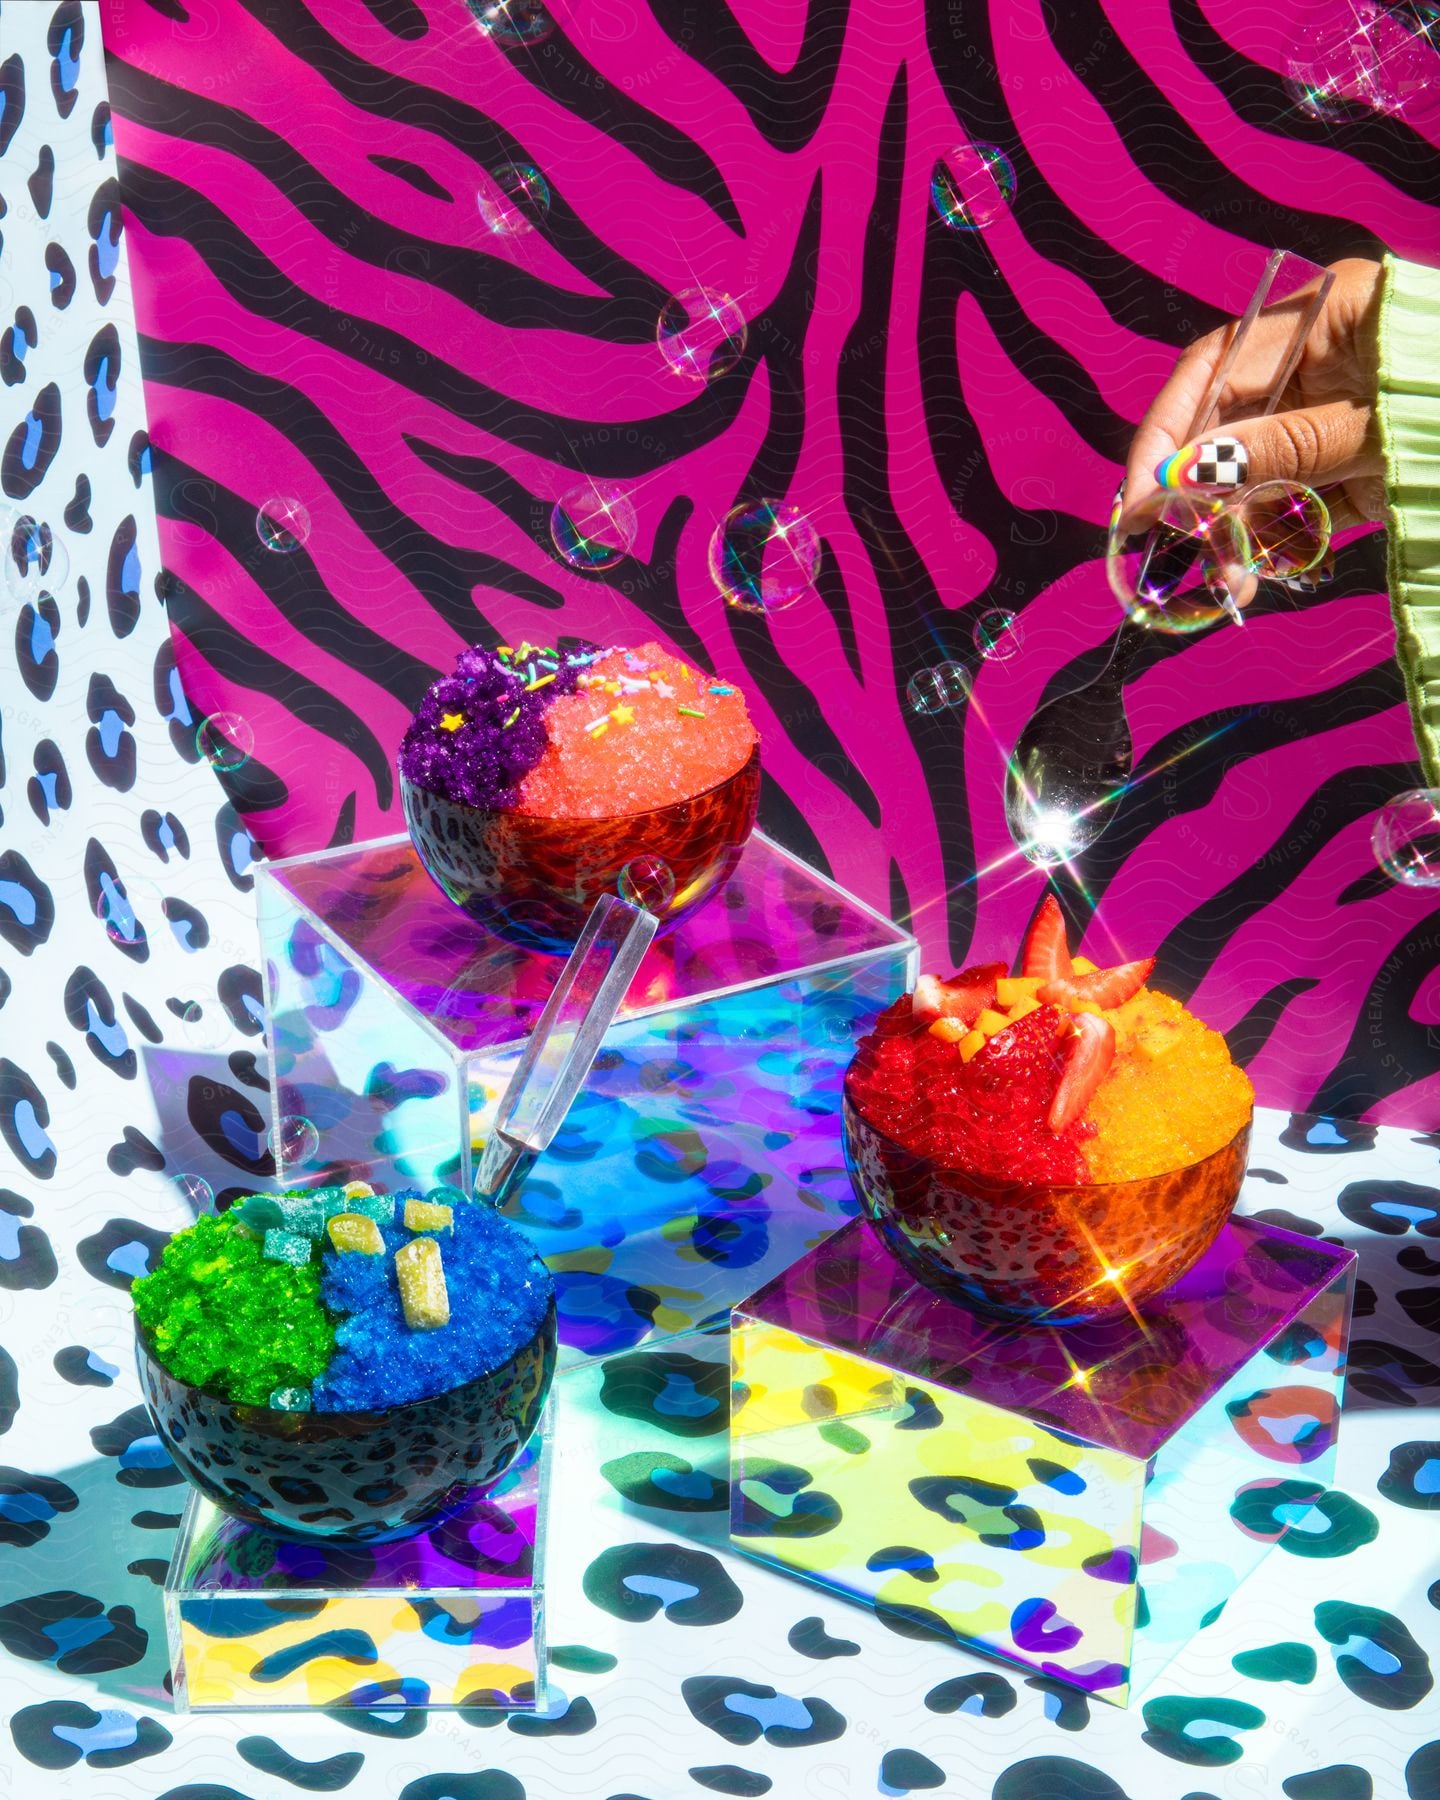 Three colorful shaved ice desserts in bowls on clear stands with a vibrant animal print background, a hand holding a spoon reaching towards one bowl.